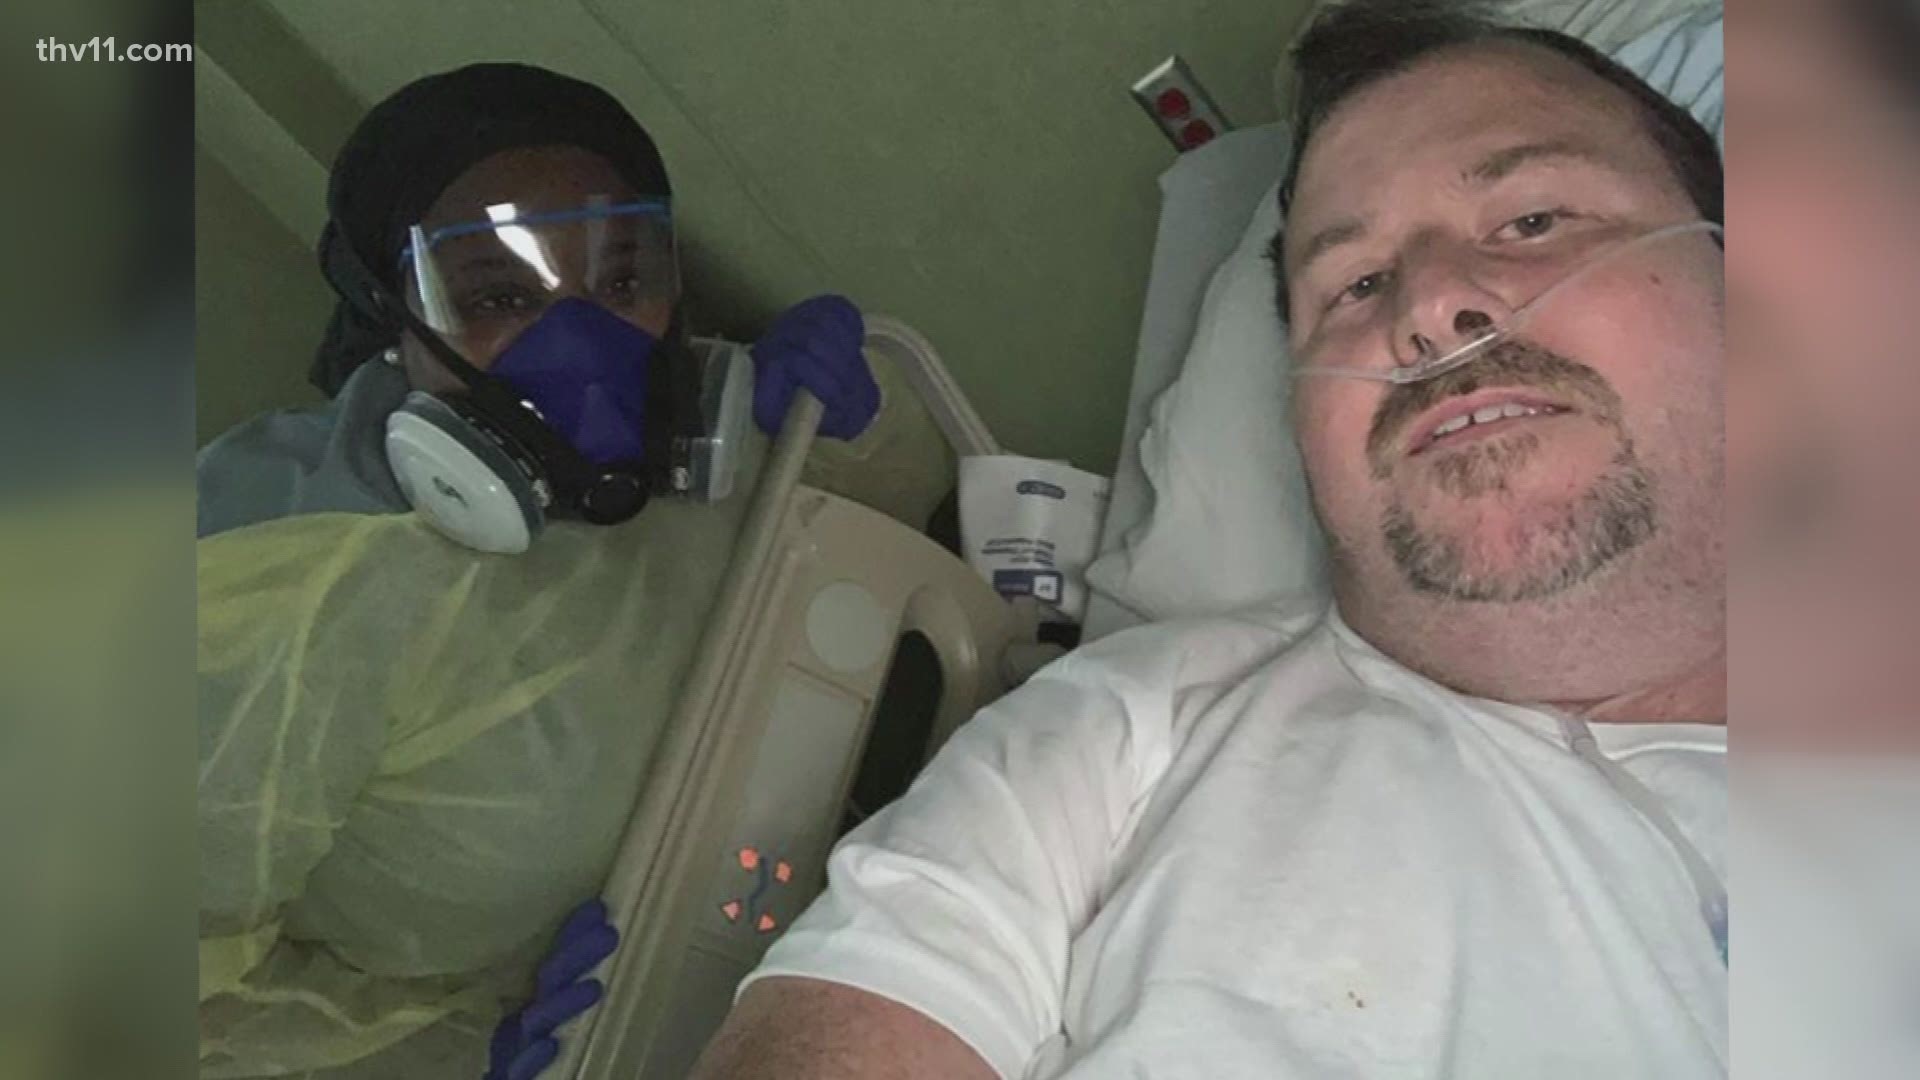 A Batesville man has technically beat COVID-19, but says his fight is far from over. The side effects of COVID-19 have become an even bigger challenge.